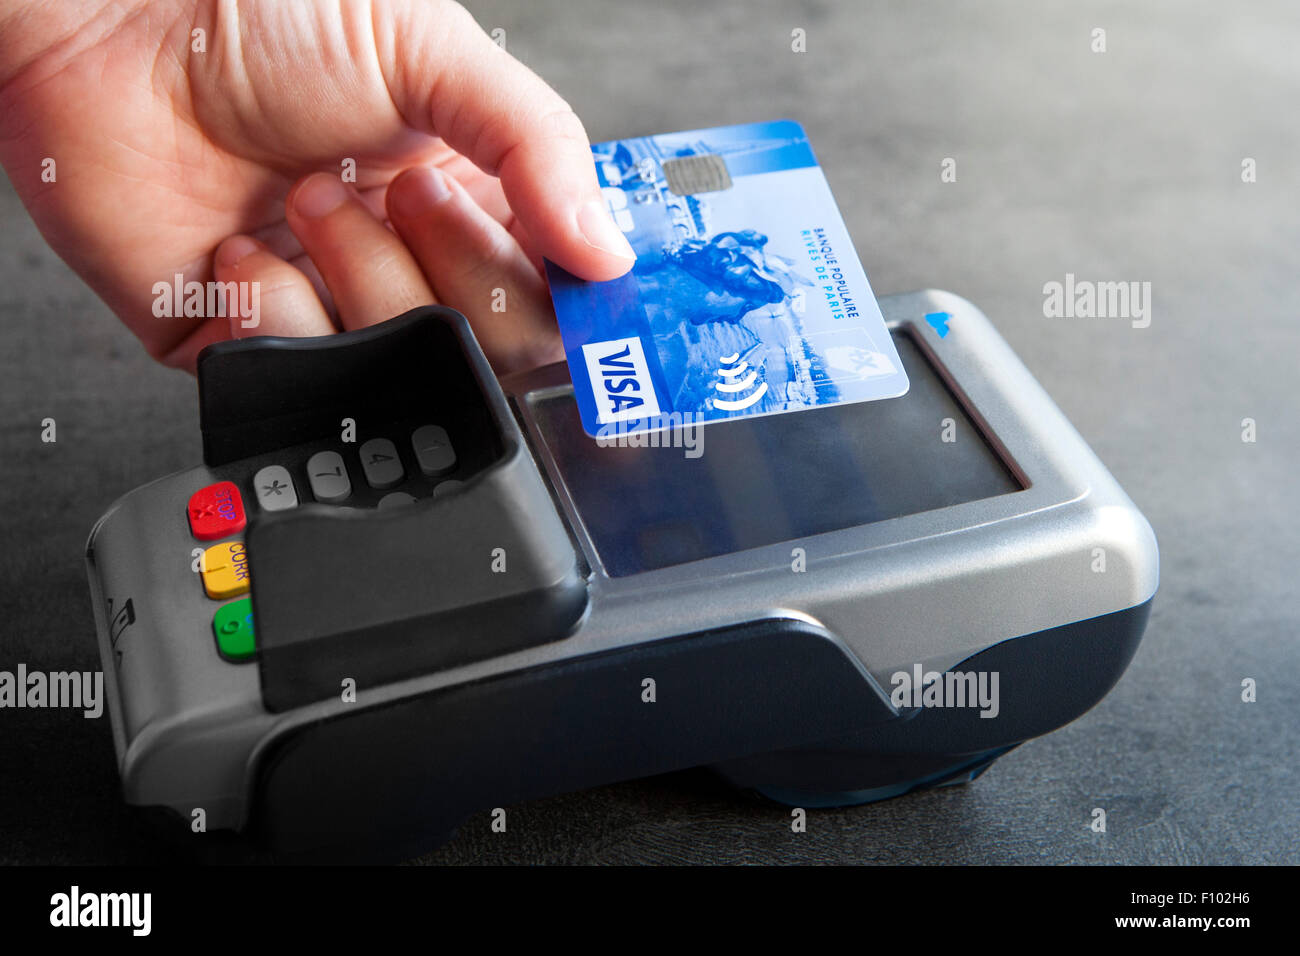 CONTACTLESS PAYMENT Stock Photo